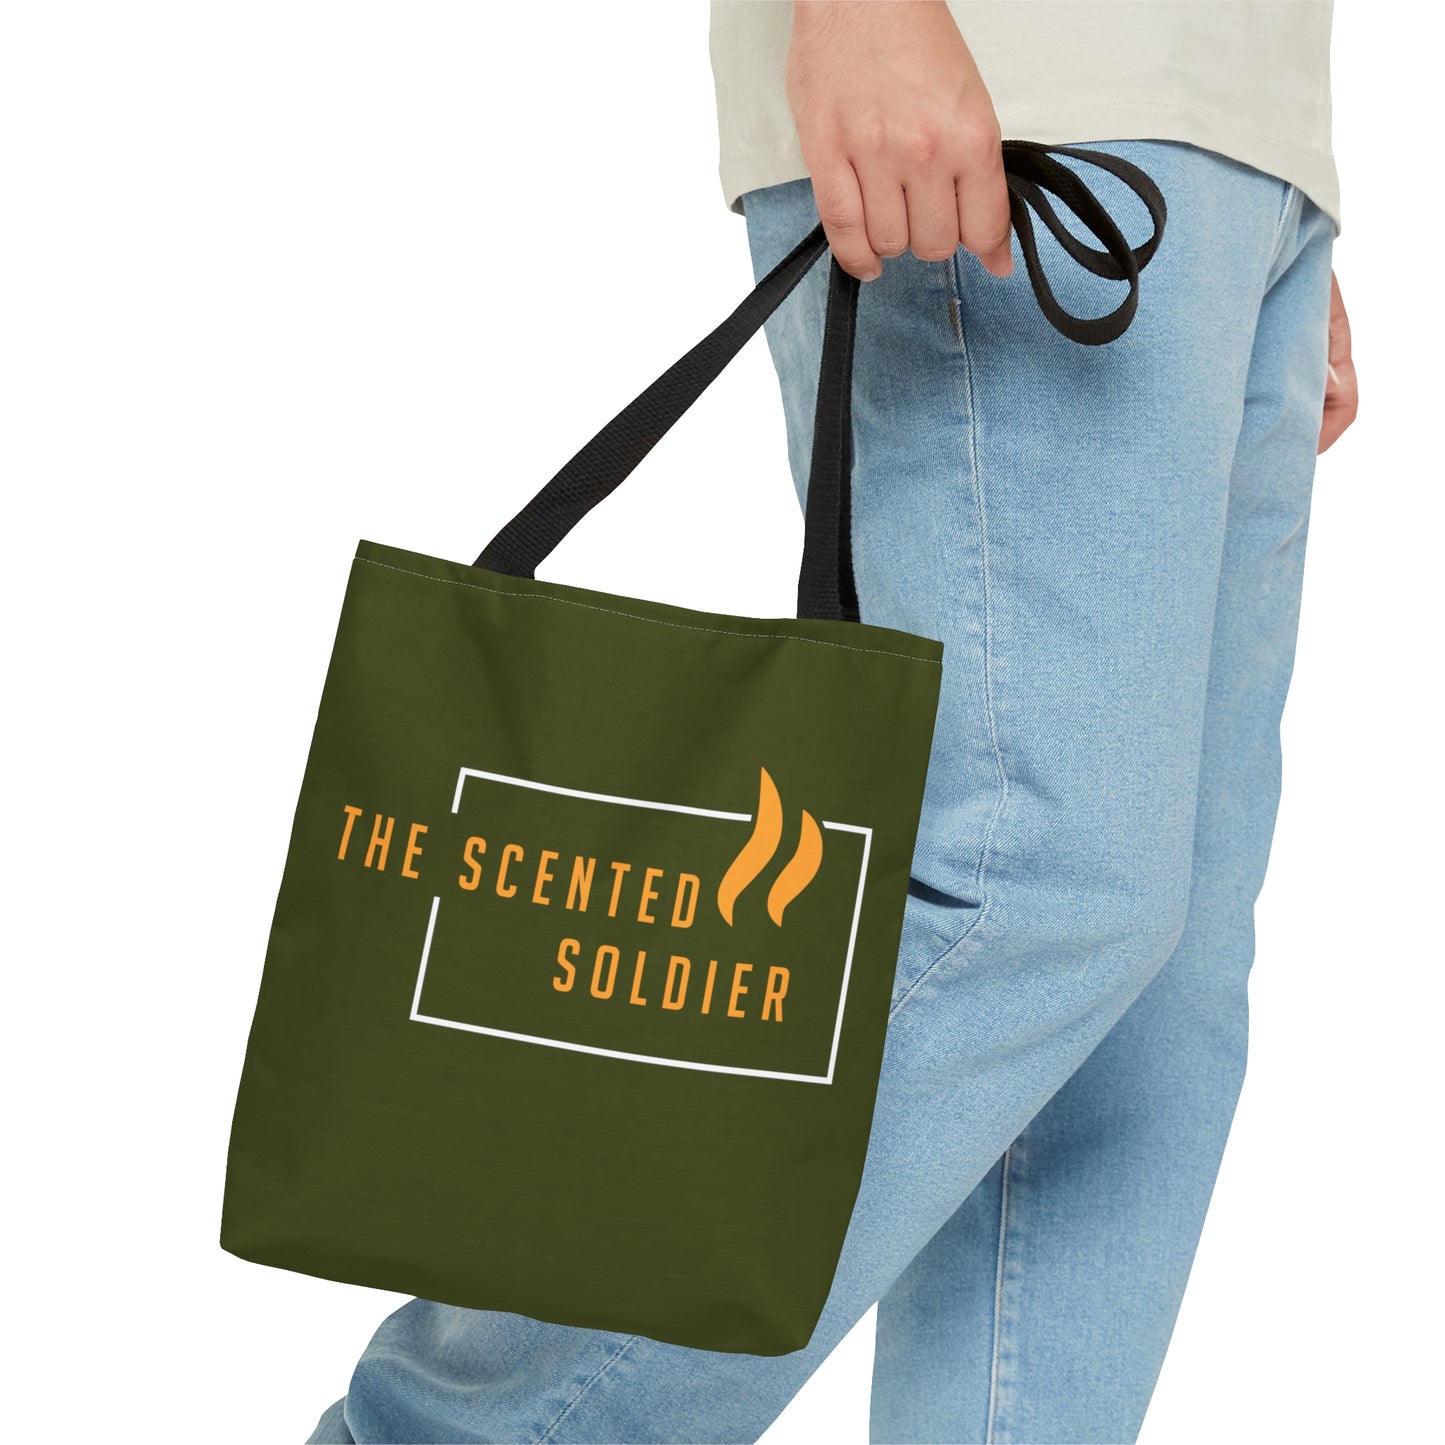 The Scented Soldier Tote Bag